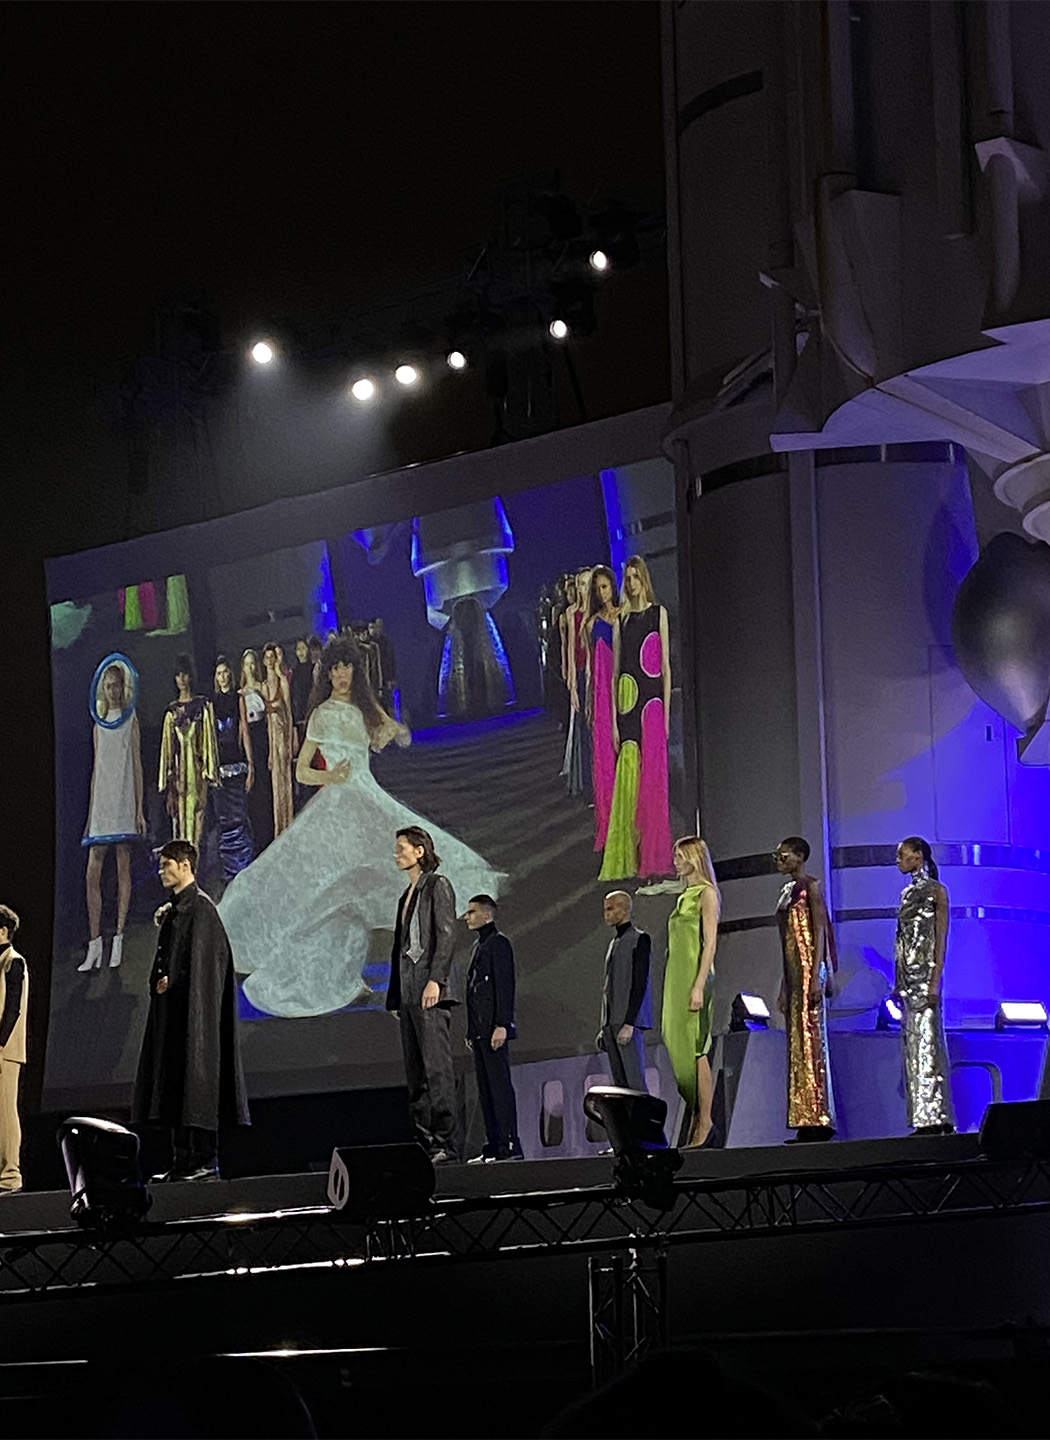 Finale at Pierre Cardin 'Cosmocorps 3022' fashion show